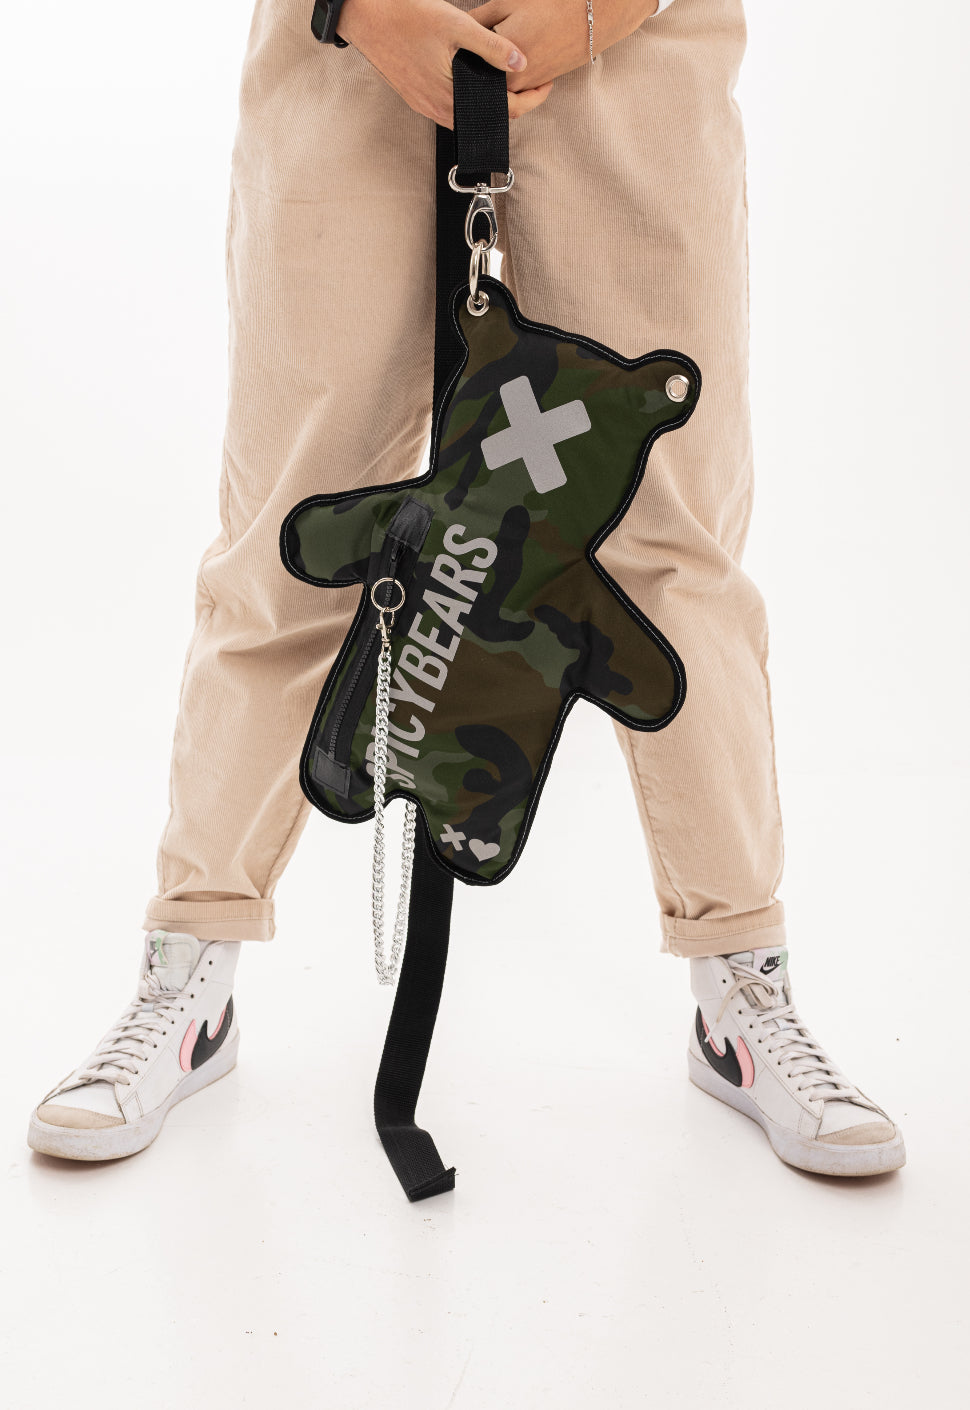 Lightweight green camo bag with white reflective print and high-quality silver color hardware for everyday use